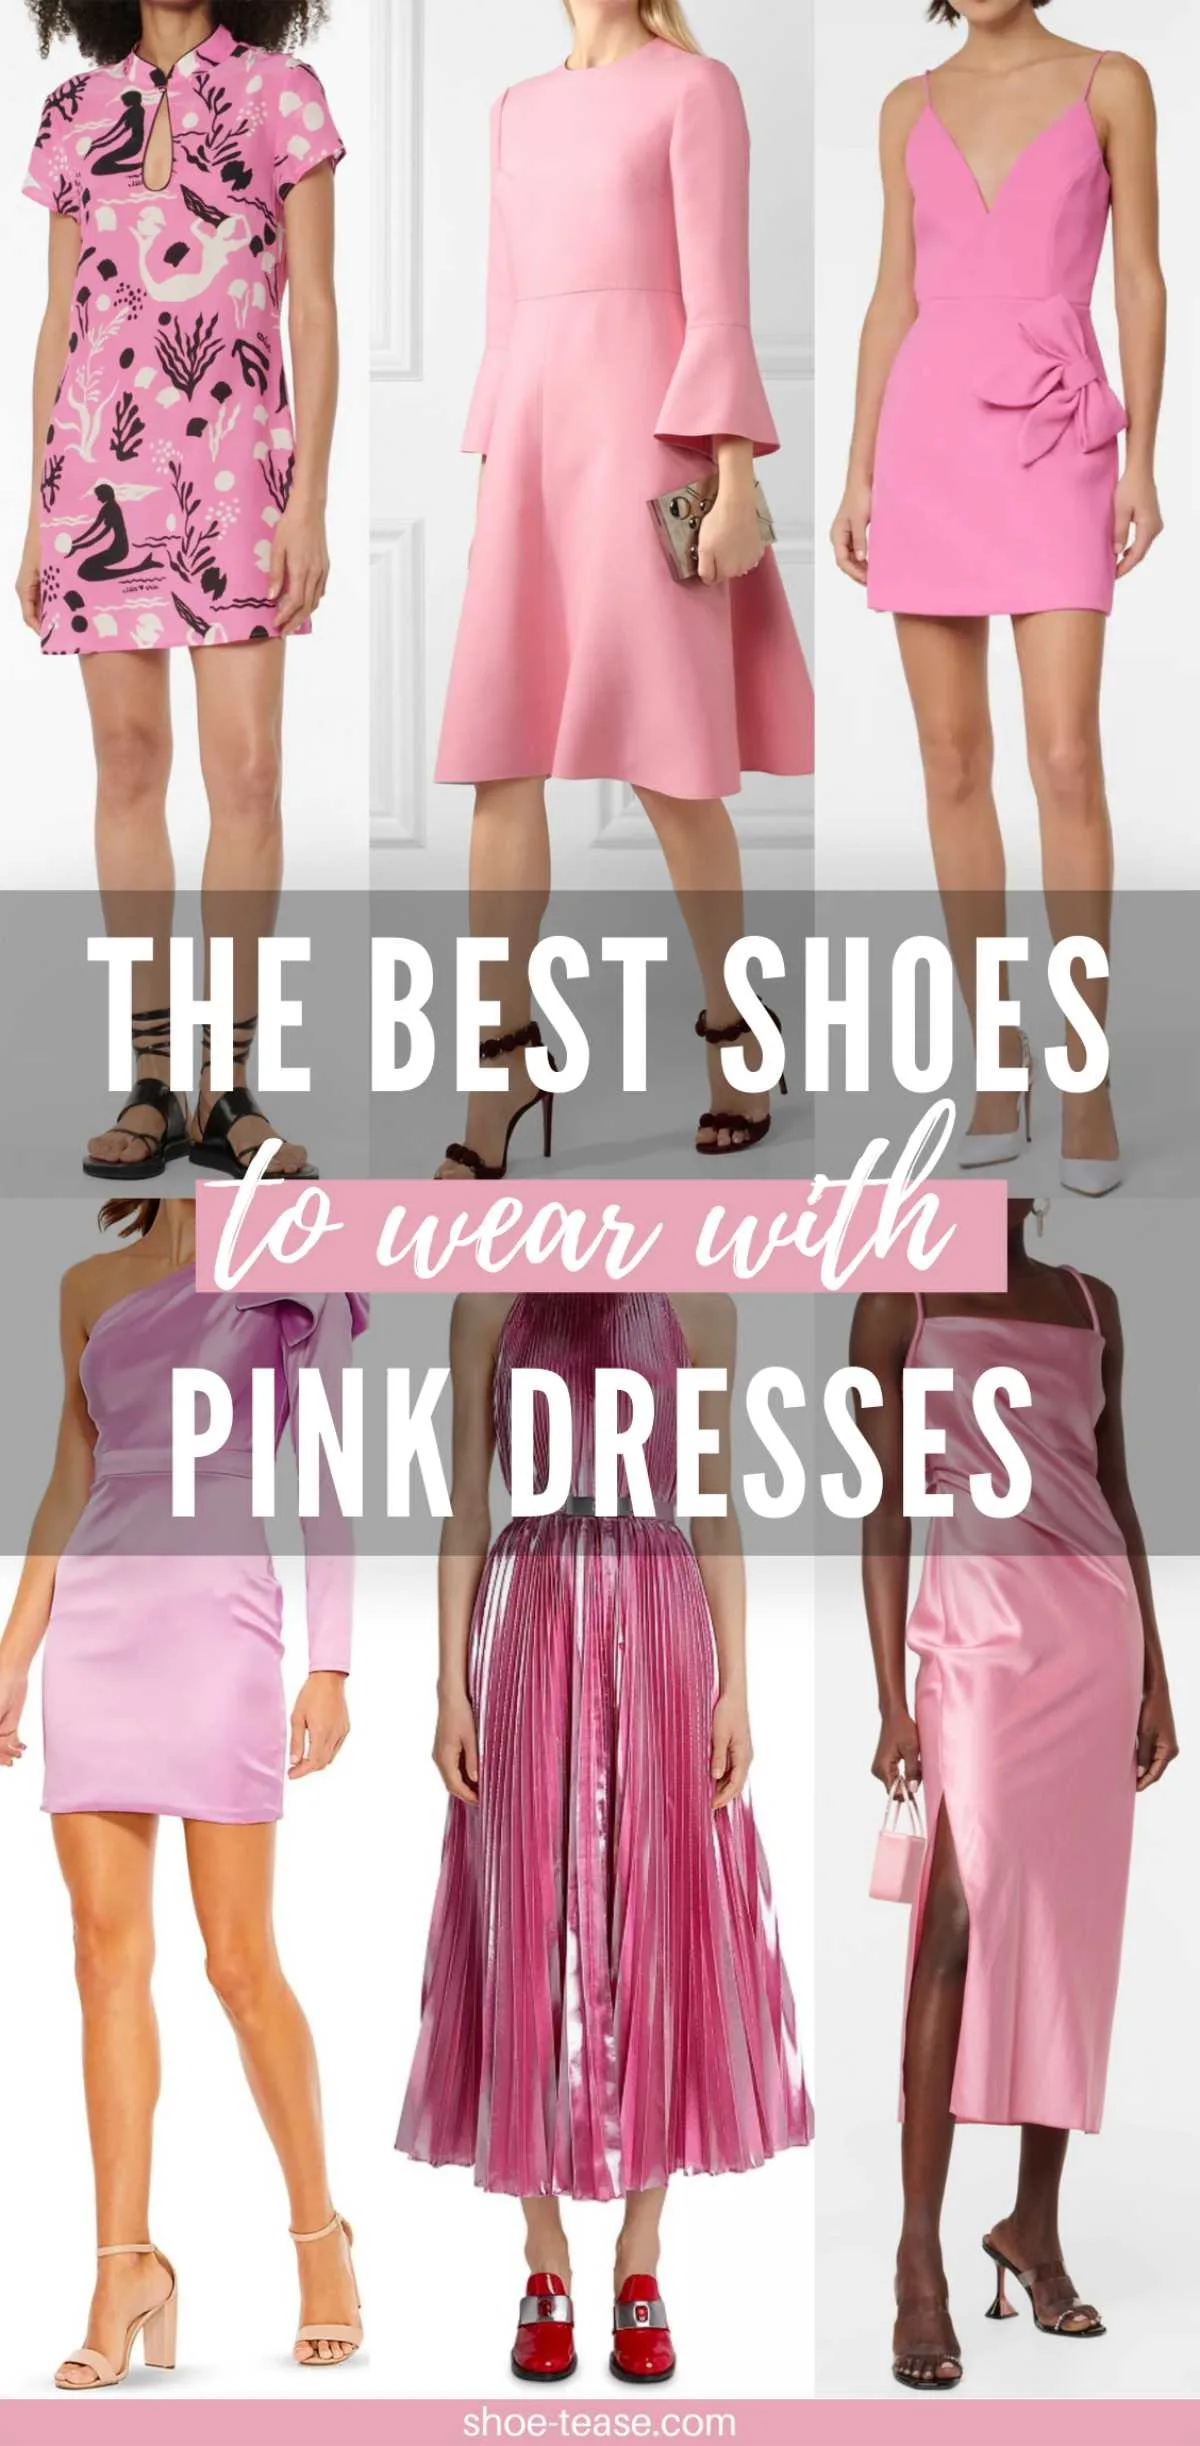 Wht Color Shoes to Wear with Pink Dresses Pin.jpg